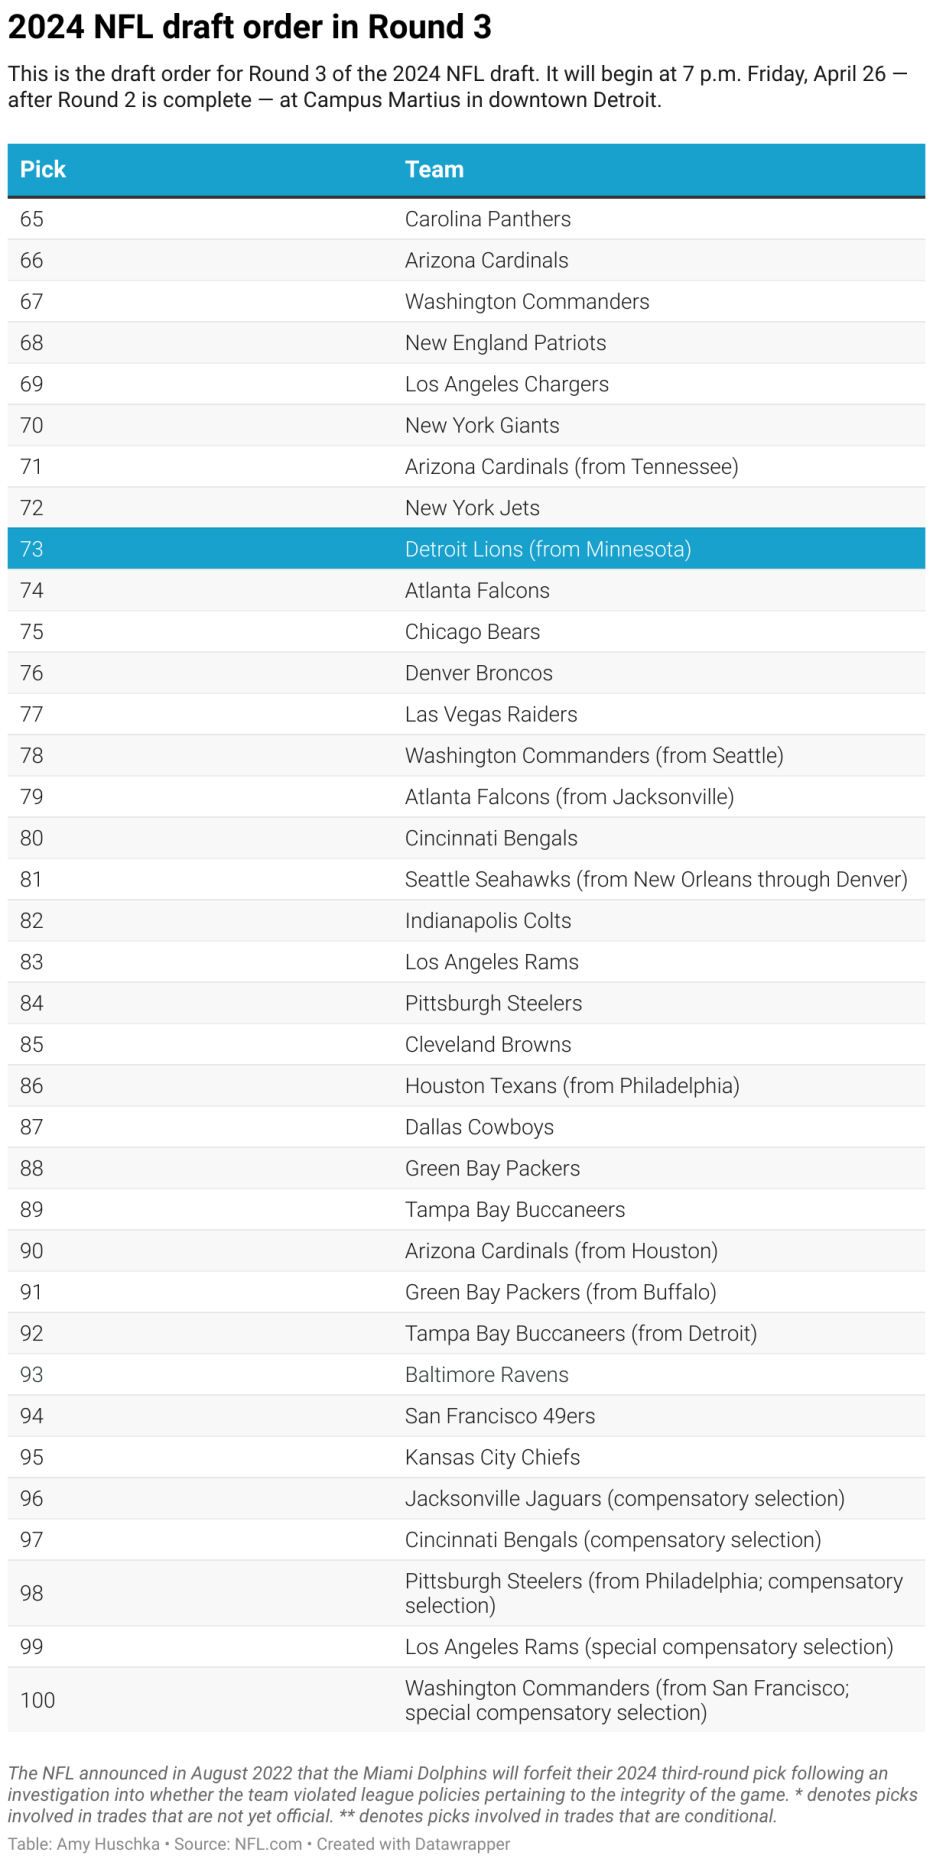 This is the draft order for Round 3 of the 2024 NFL draft. It will begin at 7 p.m. Friday, April 26 after Round 2 is complete at Campus Martius in downtown Detroit.